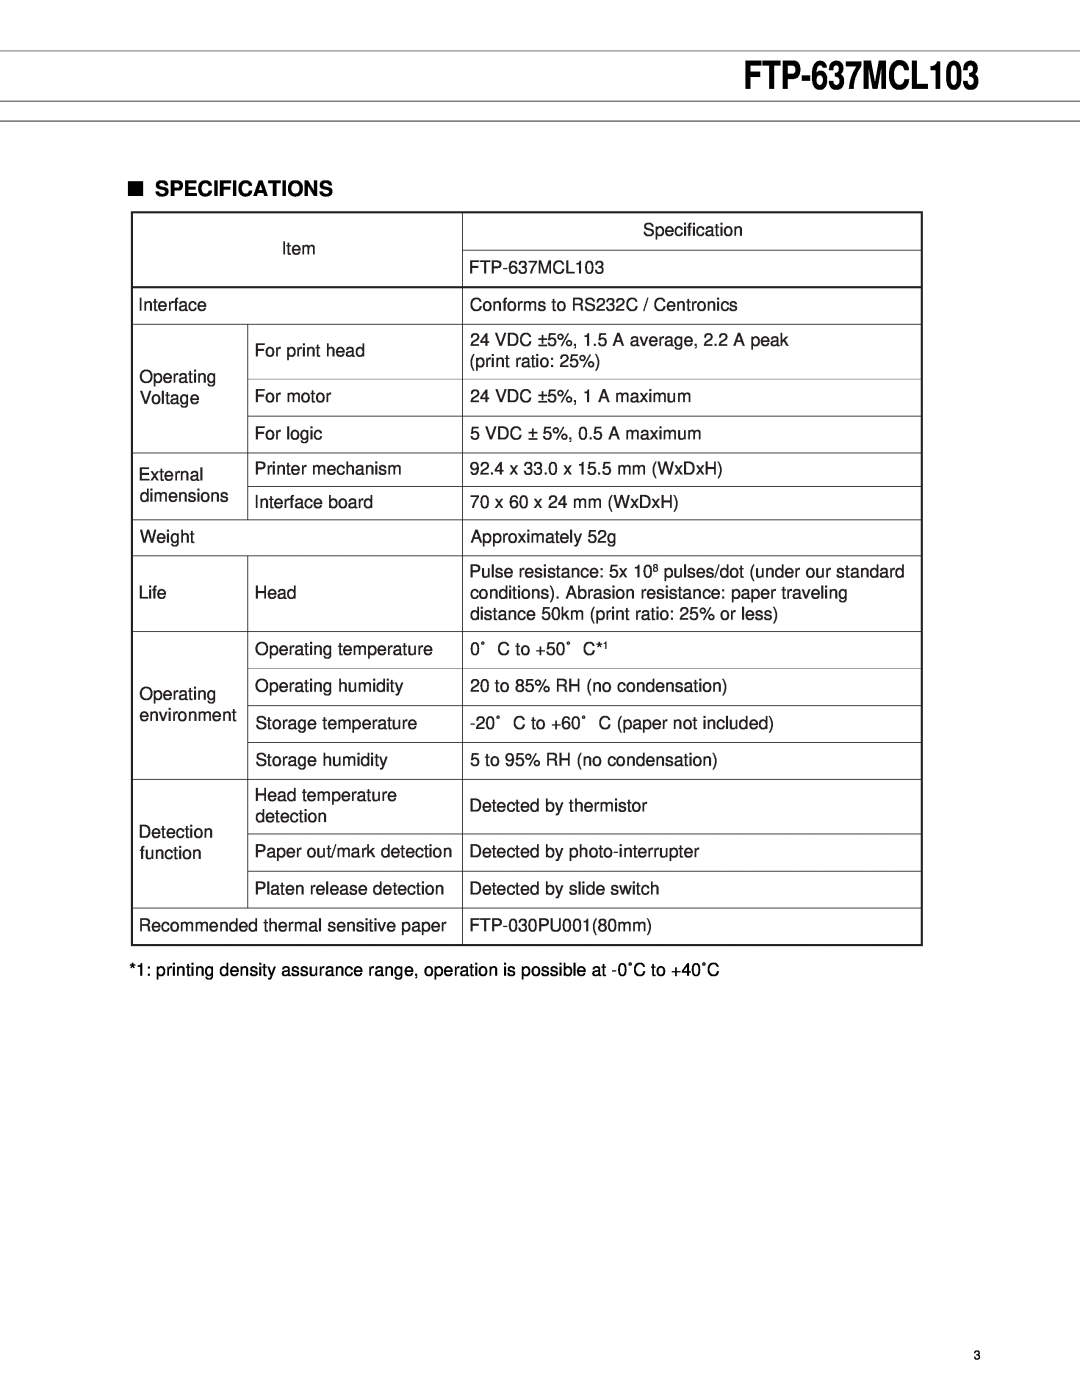 Fujitsu FTP-637MCL103, FTP-607 manual Specifications 